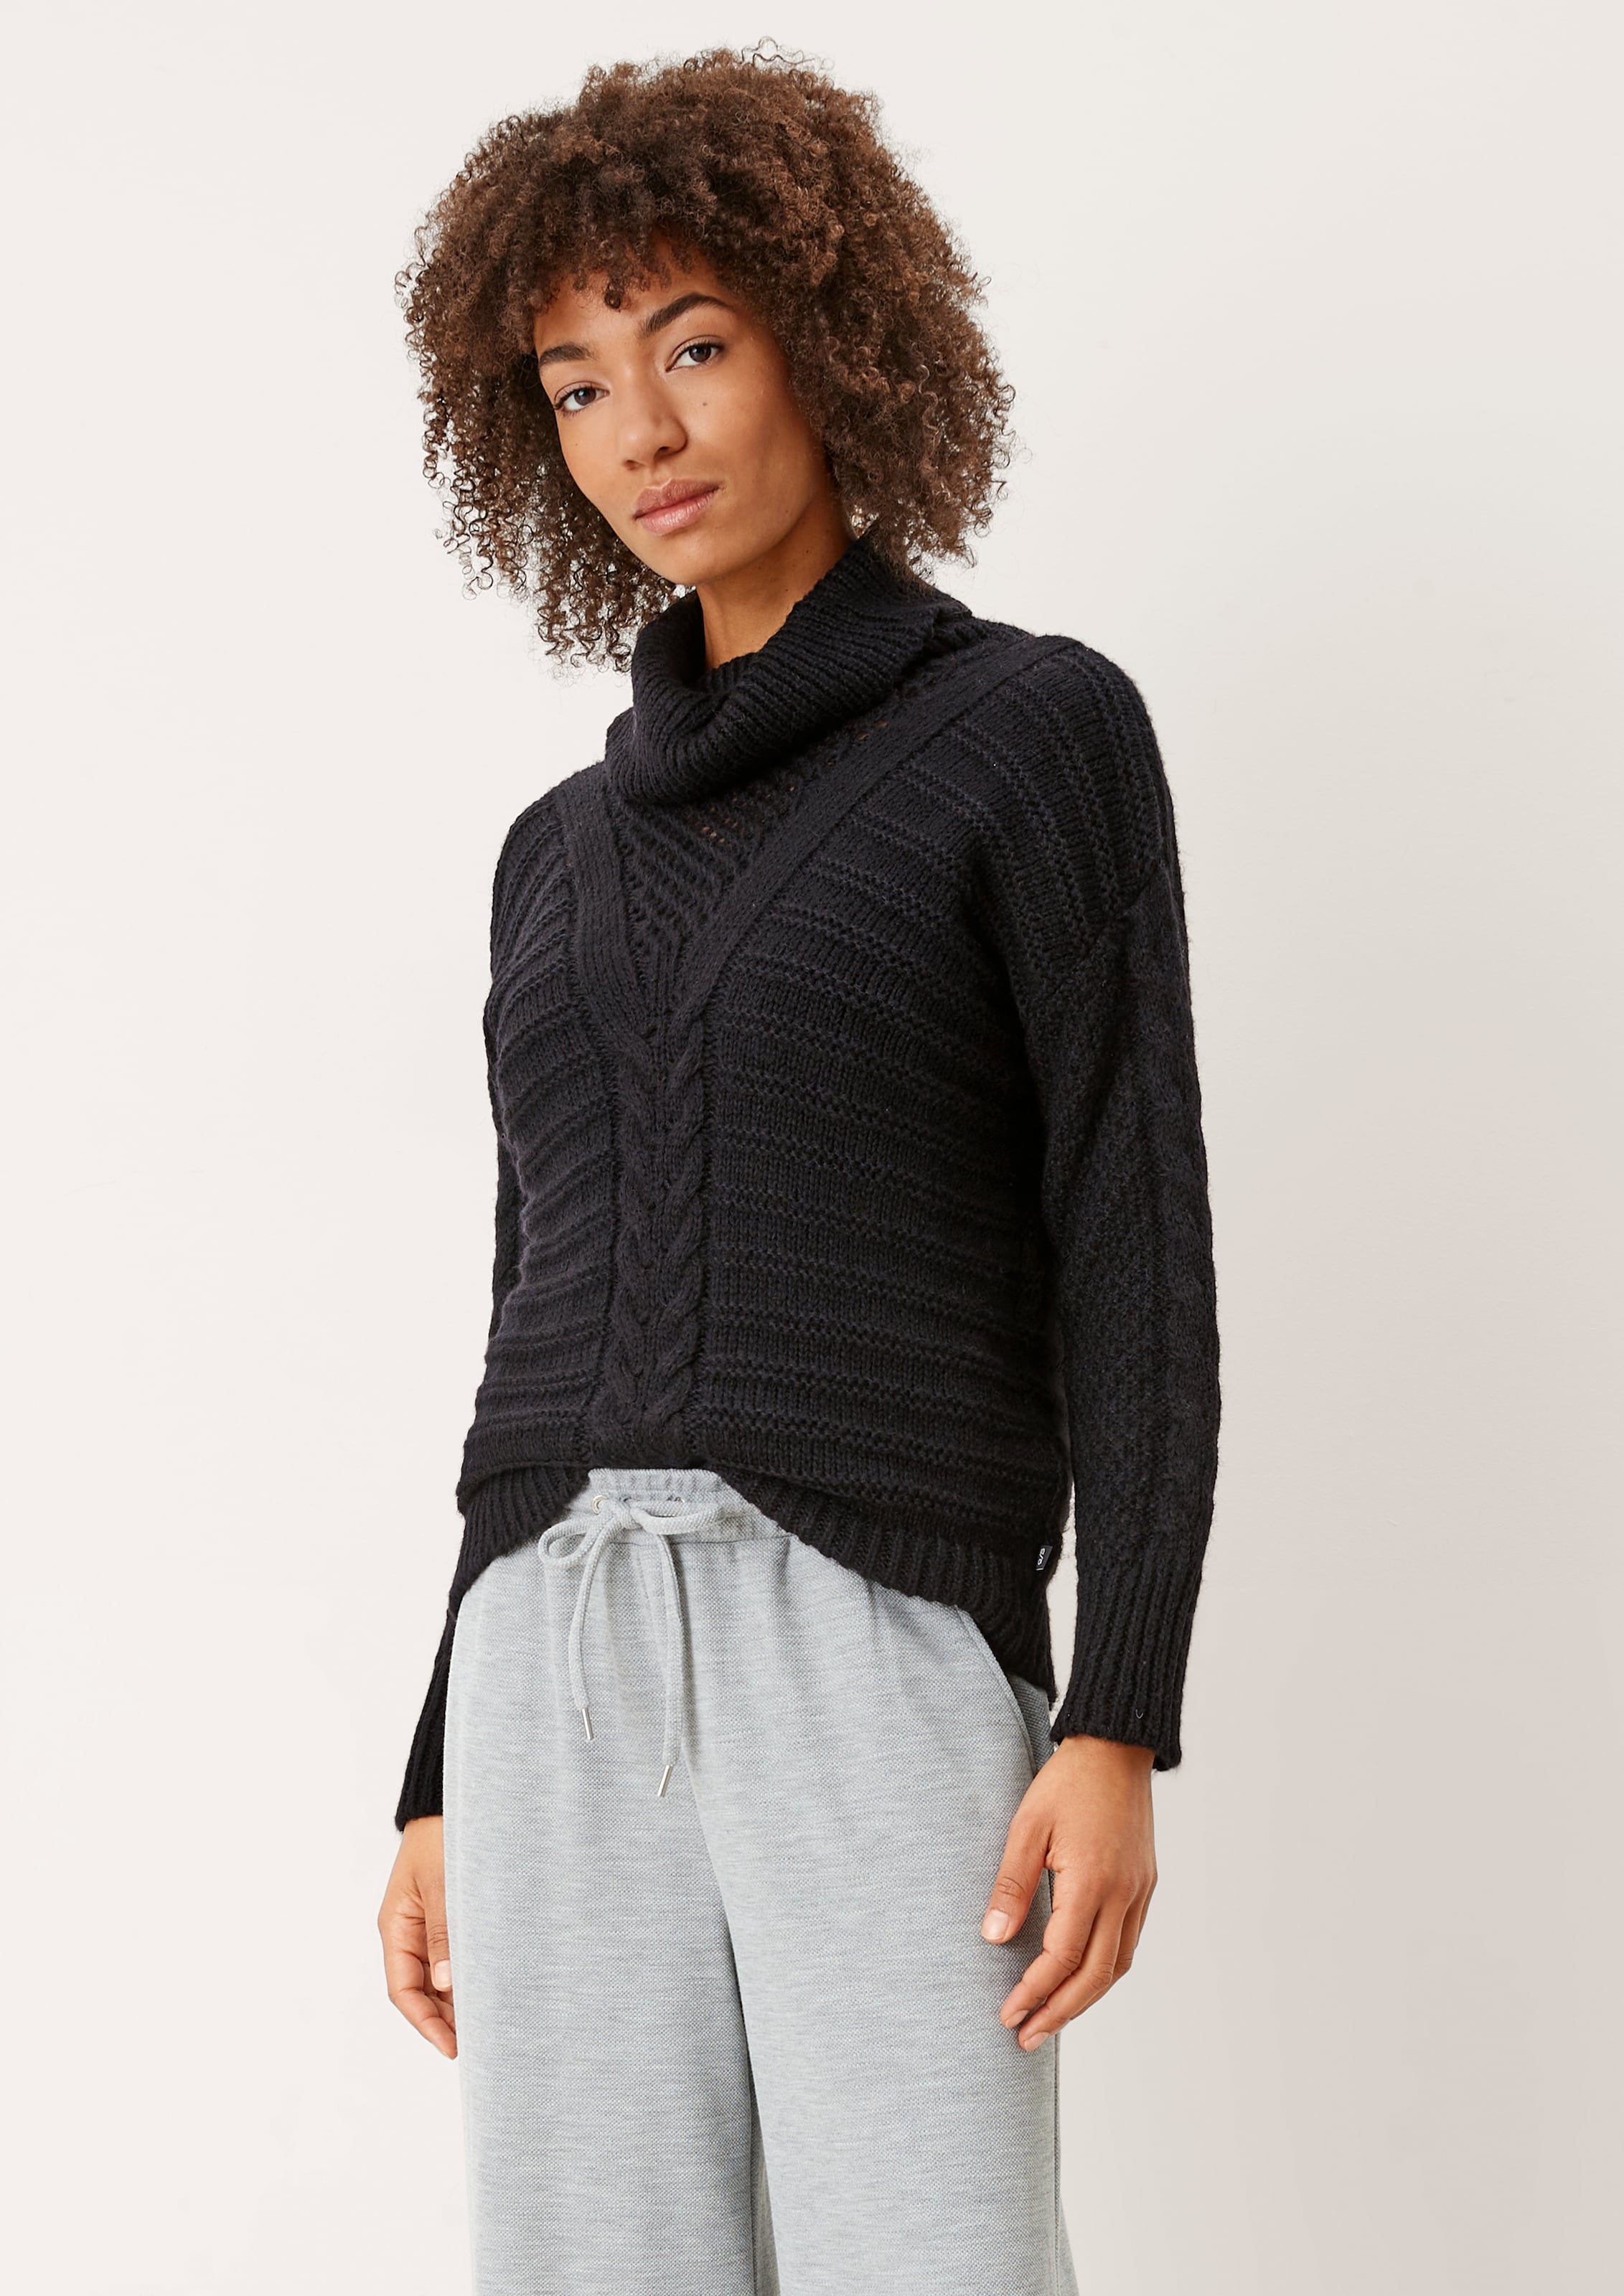 Q/S by s.Oliver Pullover in Schwarz 